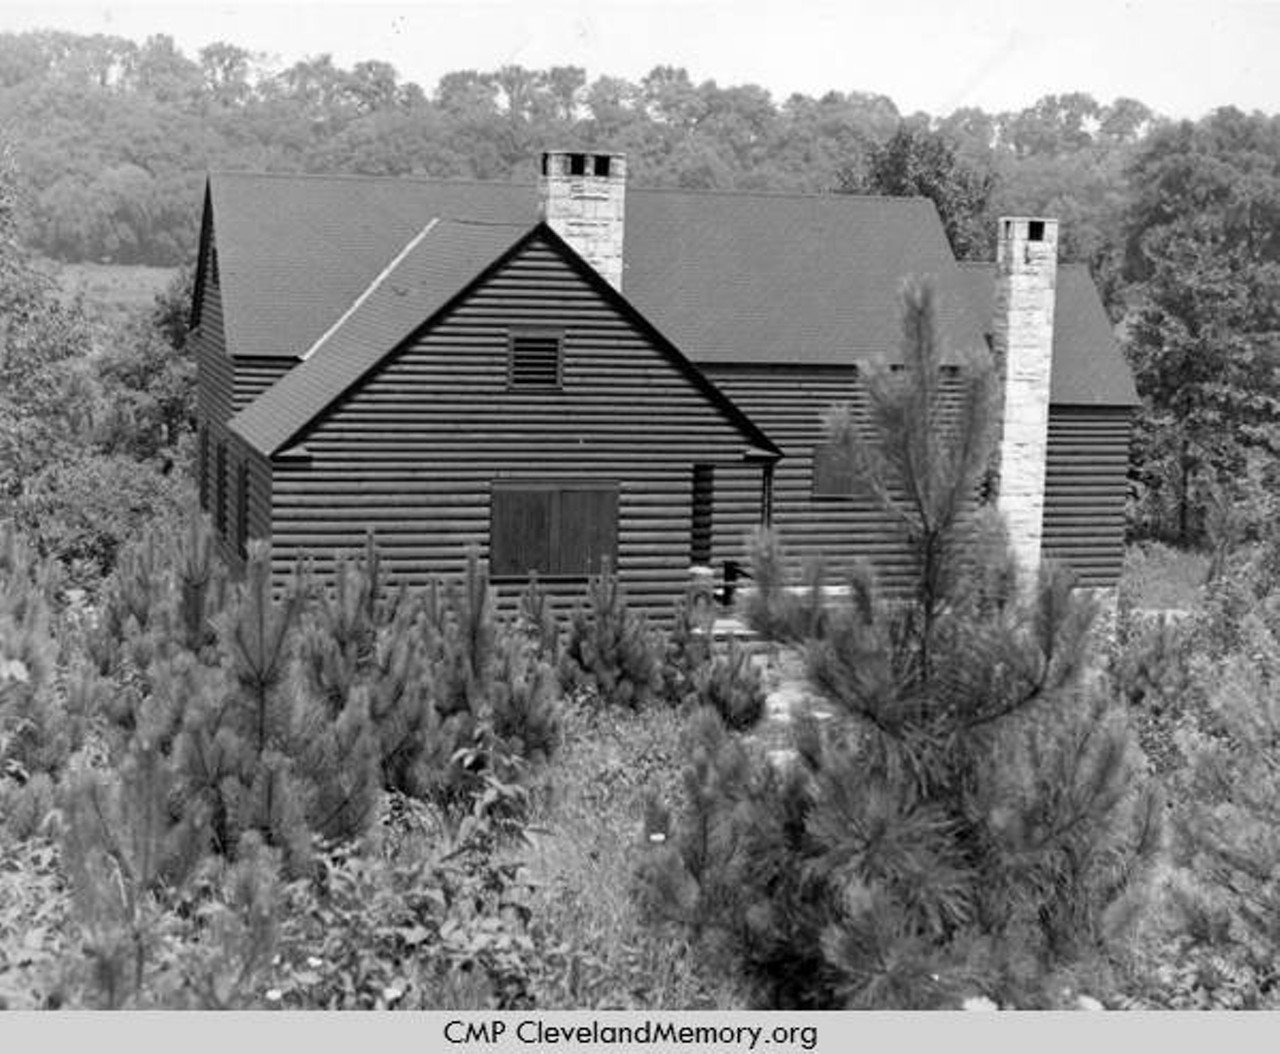  Girl Scout Cabin, Rocky River Reservation, 1936 